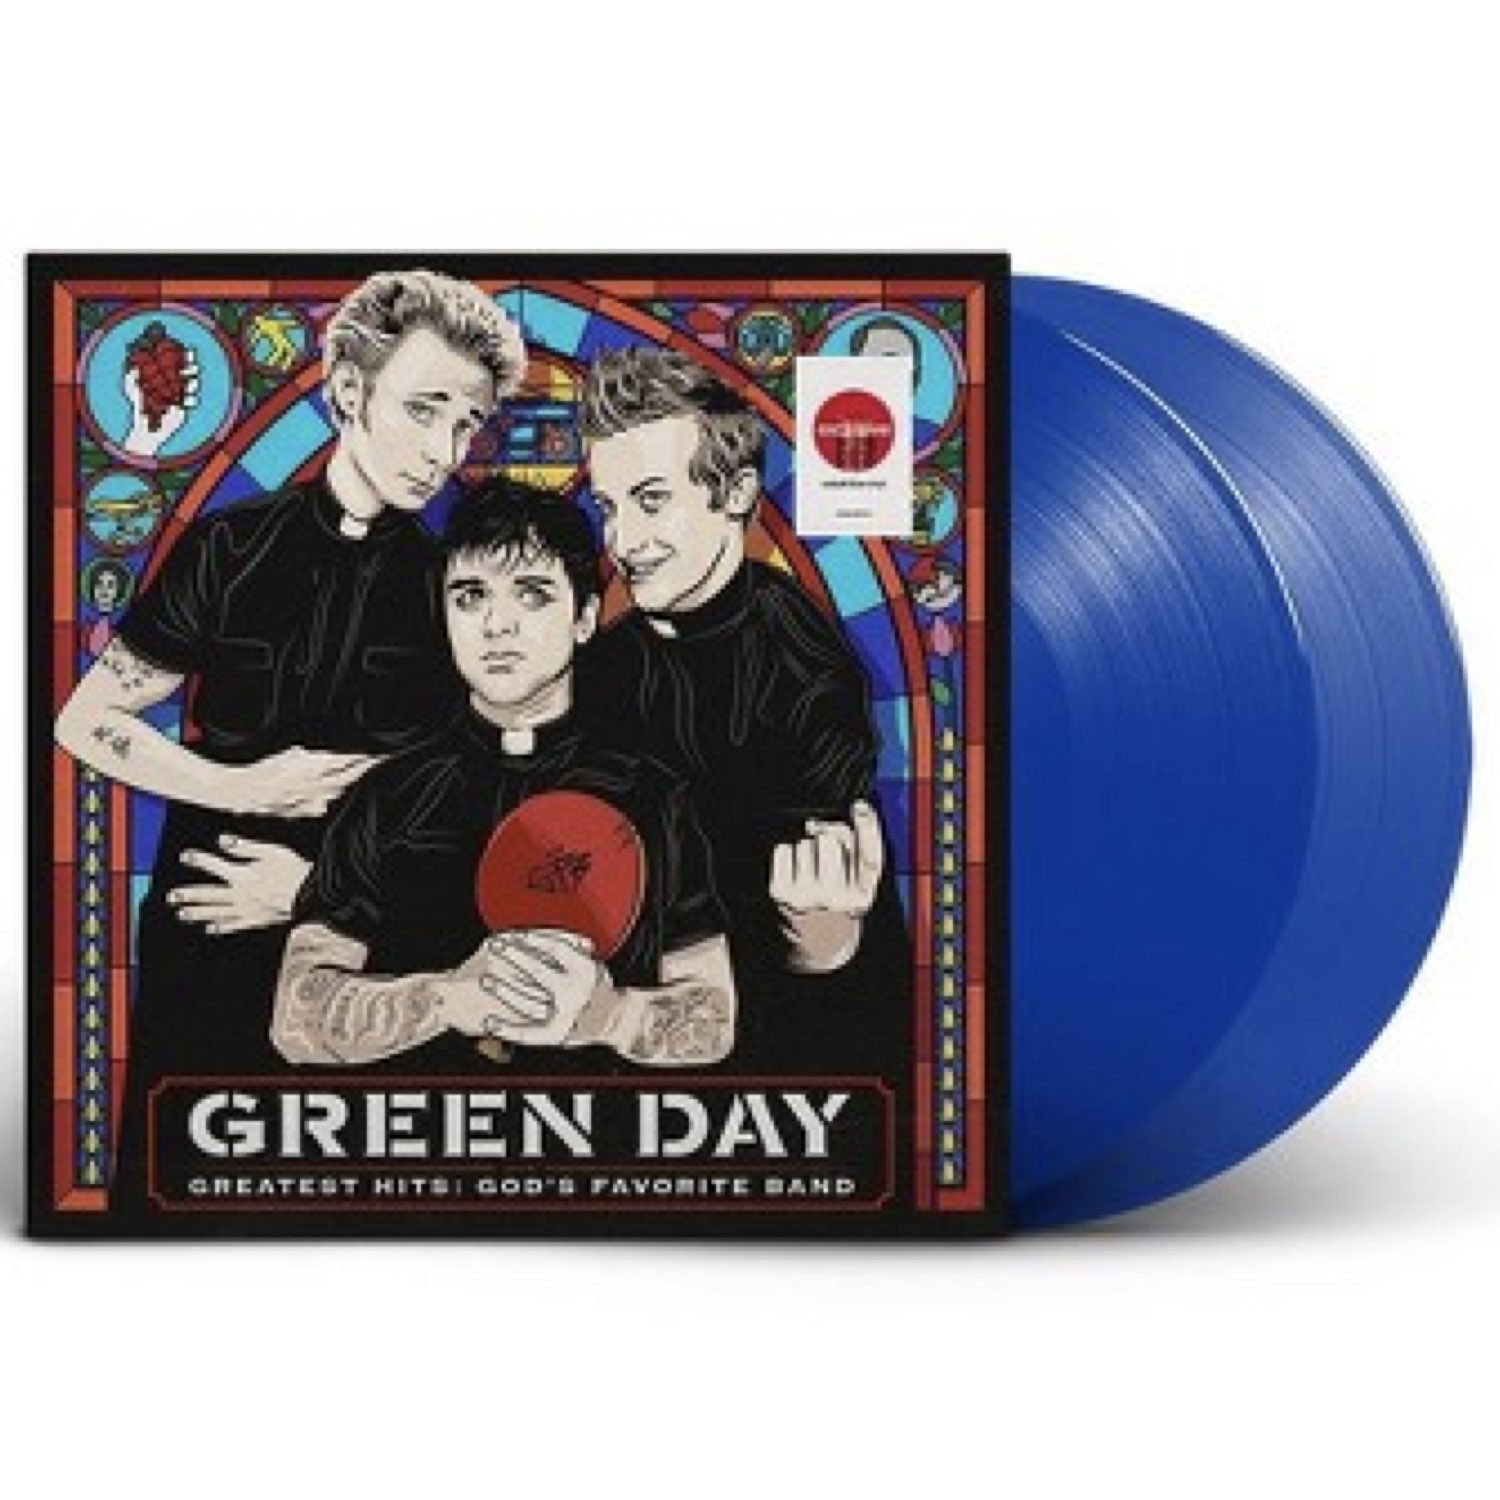 Green Day - Greatest Hits: Gods Favorite Band [Target Exclusive, Vinyl]